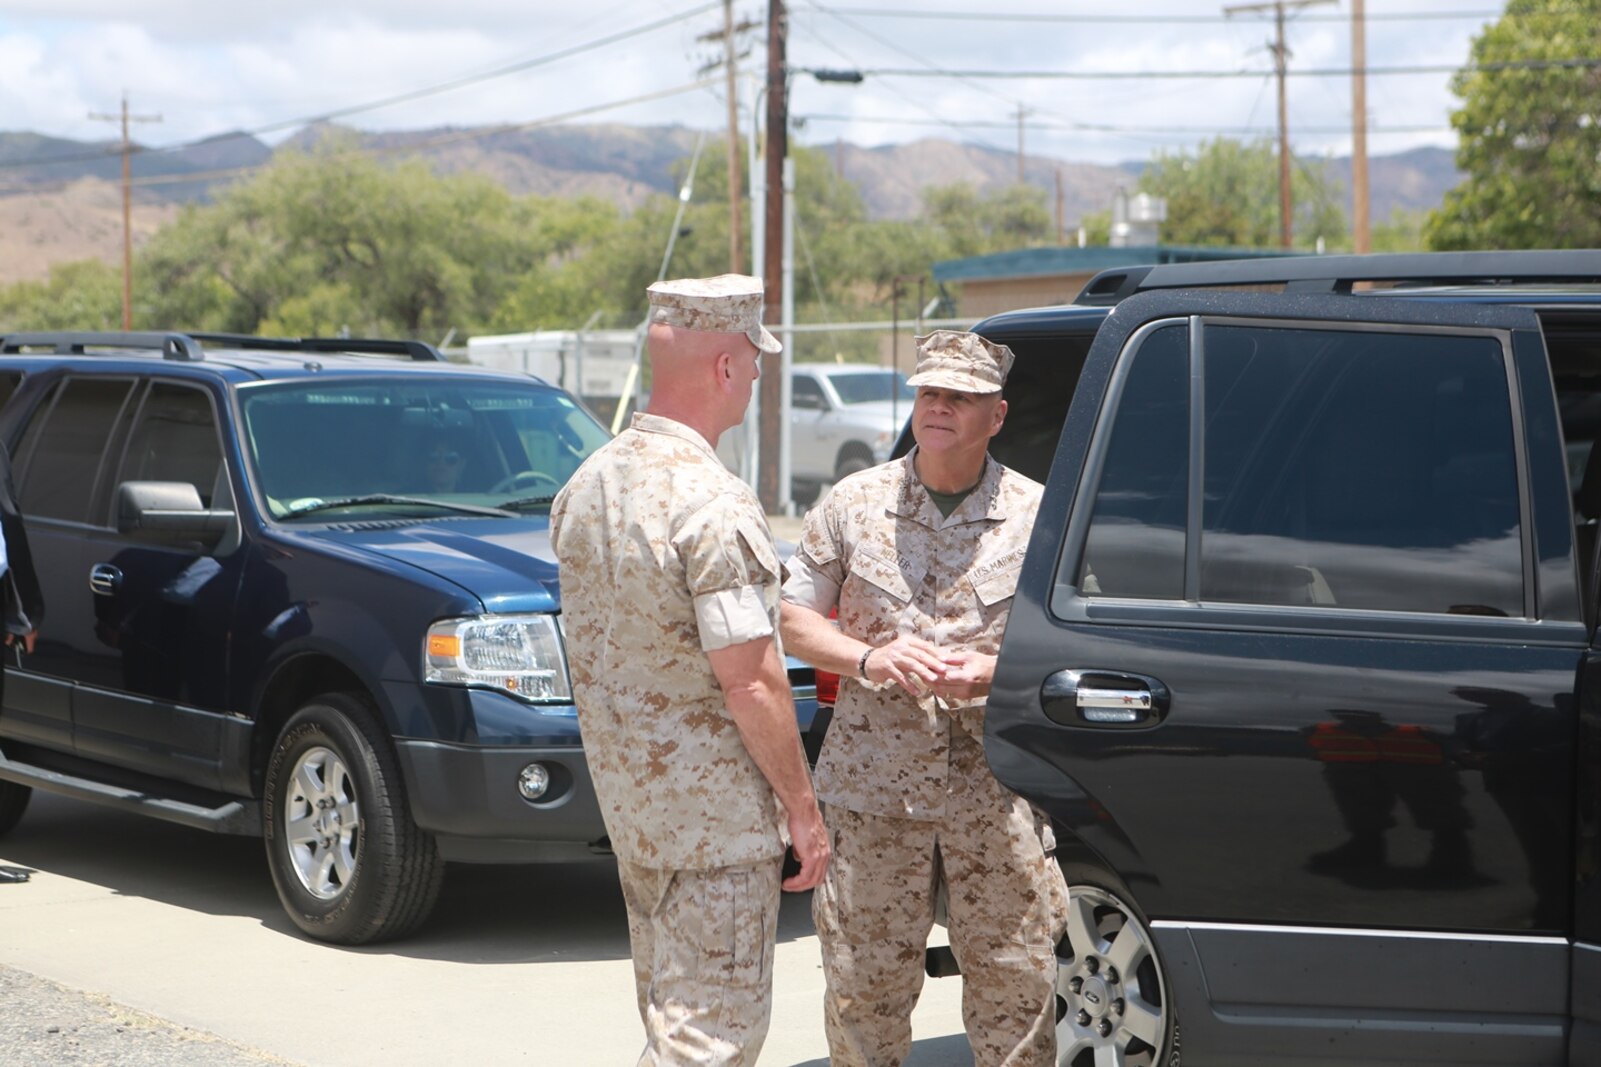 U.S. Marine Corps Gen. Robert Neller, Commandant of the Marine Corps, meets with Brig. Gen. David Ottignon, commanding general, 1st Marine Logistics Group to talk about the current and future 3D printing operations using the Expeditionary Manufacturing System within the 1st MLG on Camp Pendleton, Calif., May 24, 2016. The Expeditionary Manufacturing System is a mobile 3D printing and milling shop designed to provide quick turnaround for mission critical parts in deployed environment. (U.S. Marine Corps photo by Sgt. Rodion Zabolotniy, Combat Camera, Camp Pendleton/RELEASED)